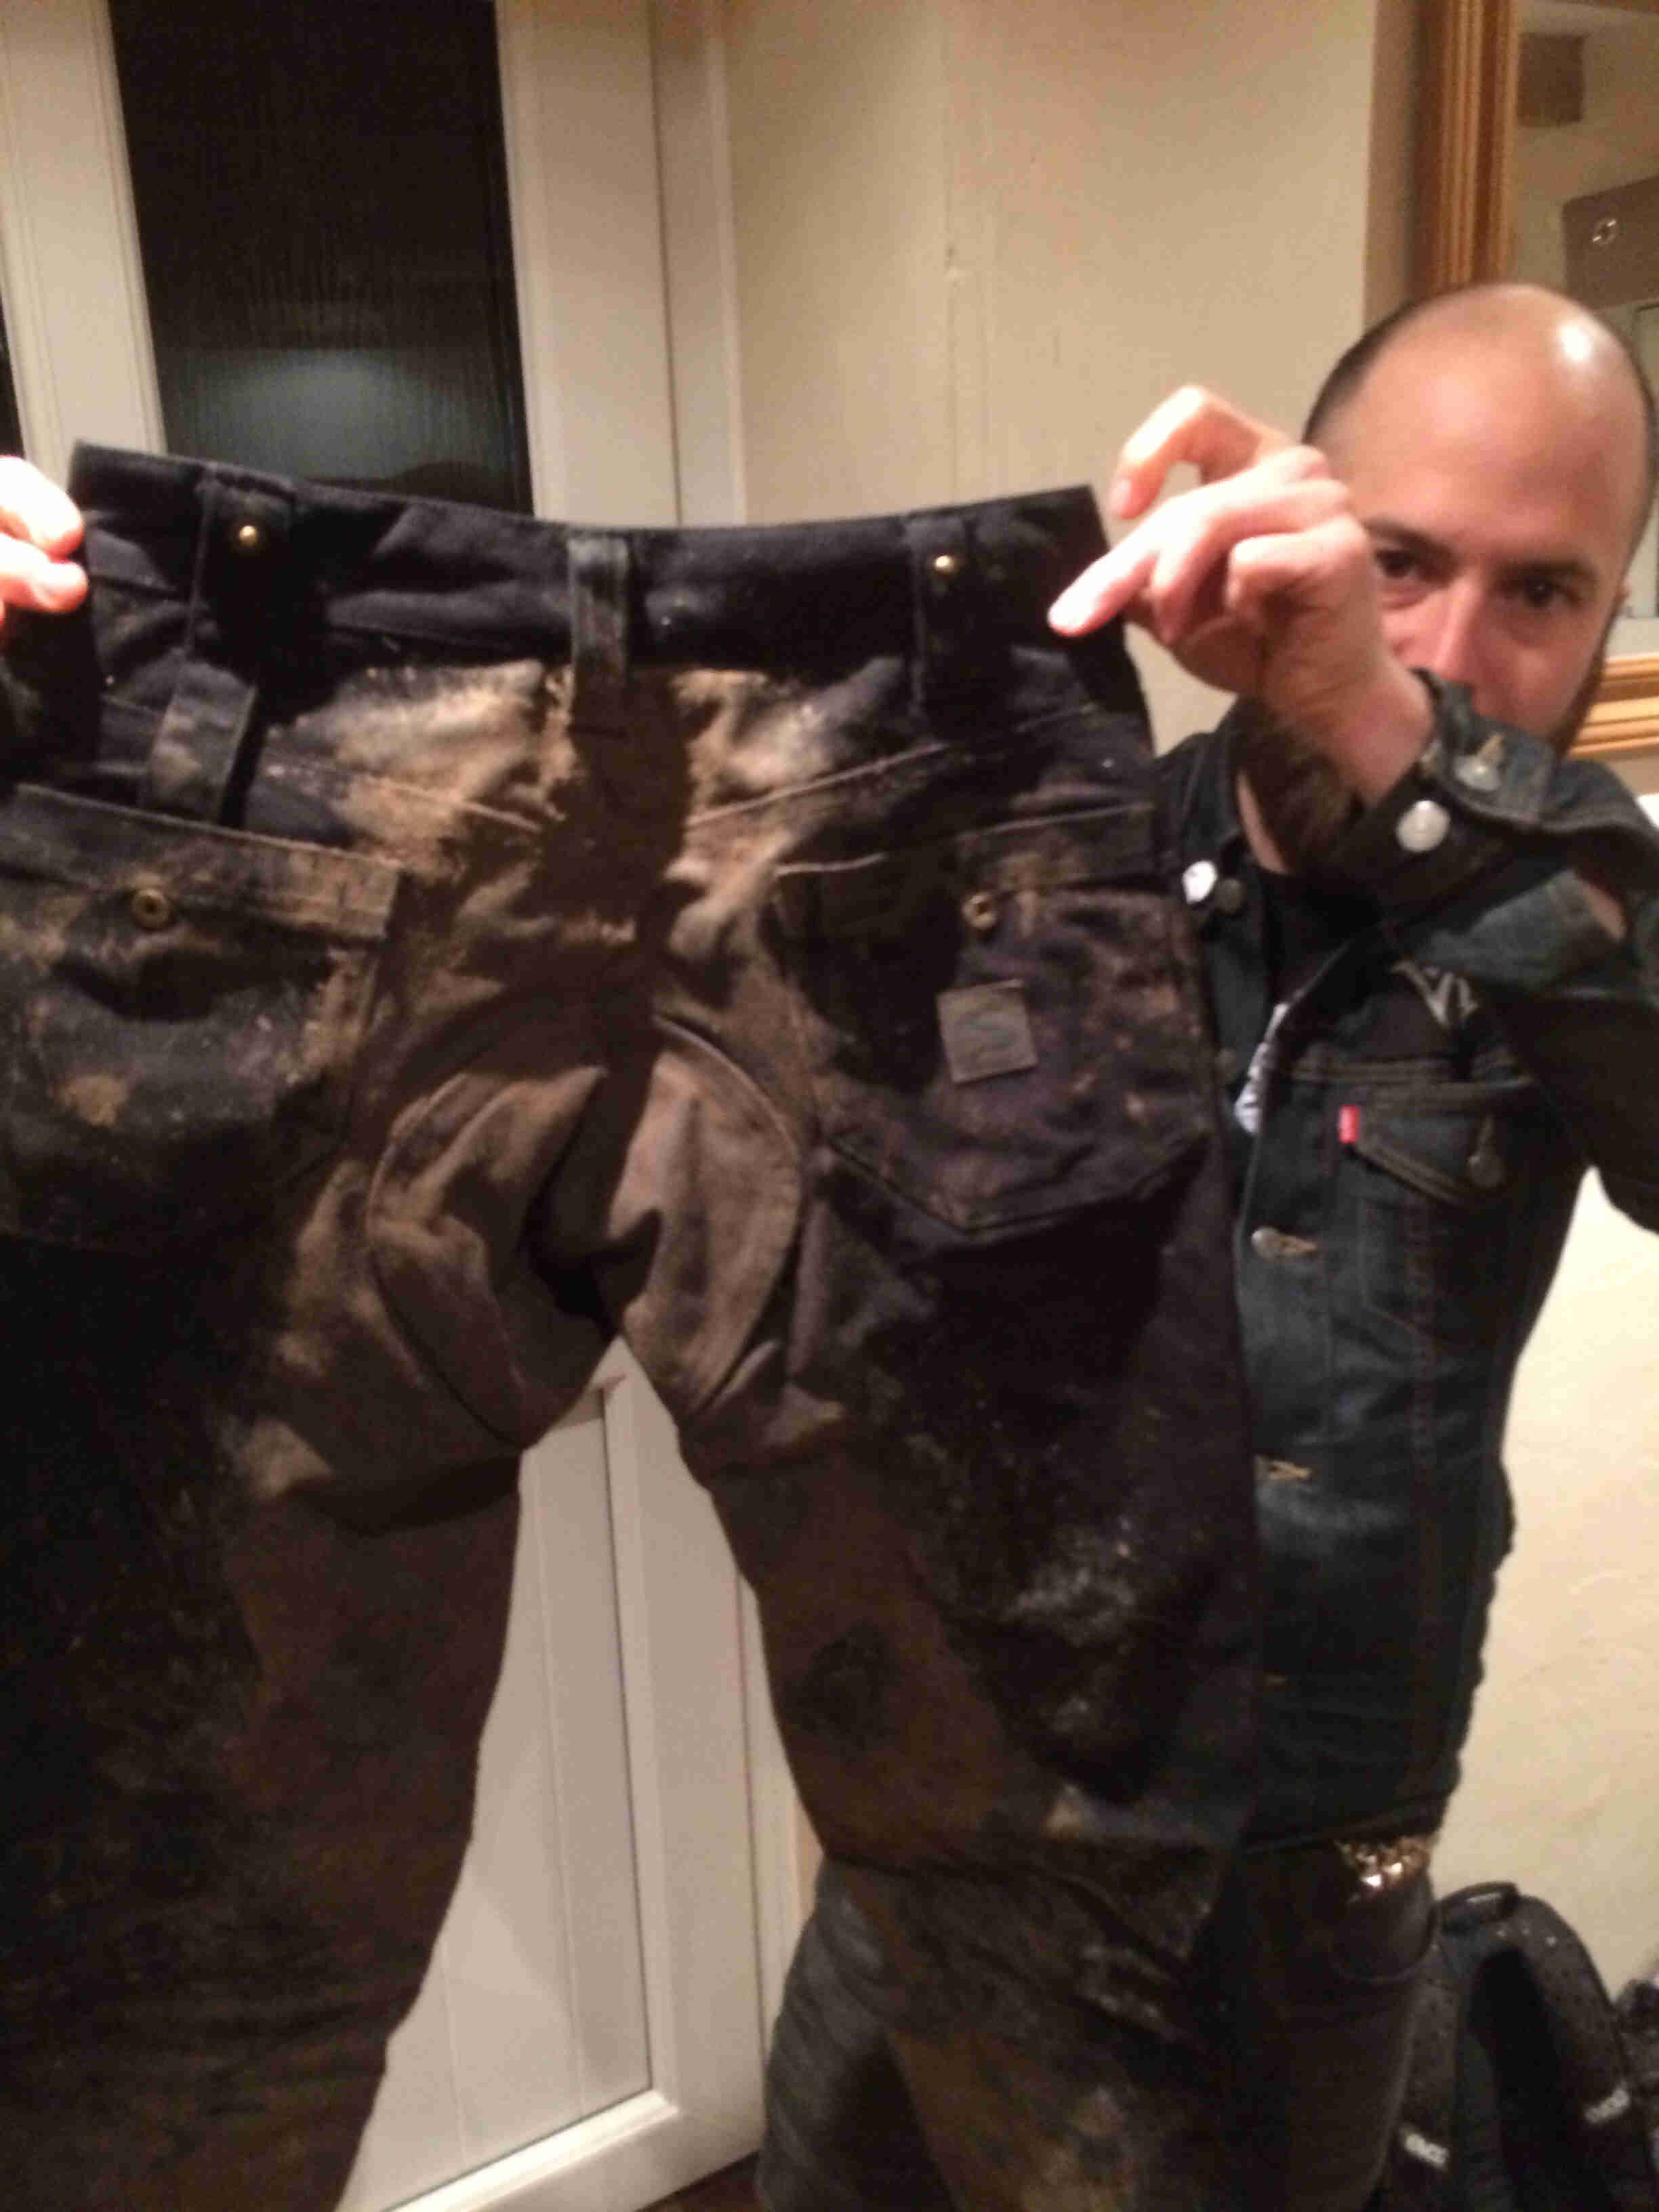 Rear view of a muddy pair of black pants, with a person holding them up from behind, in an interior room